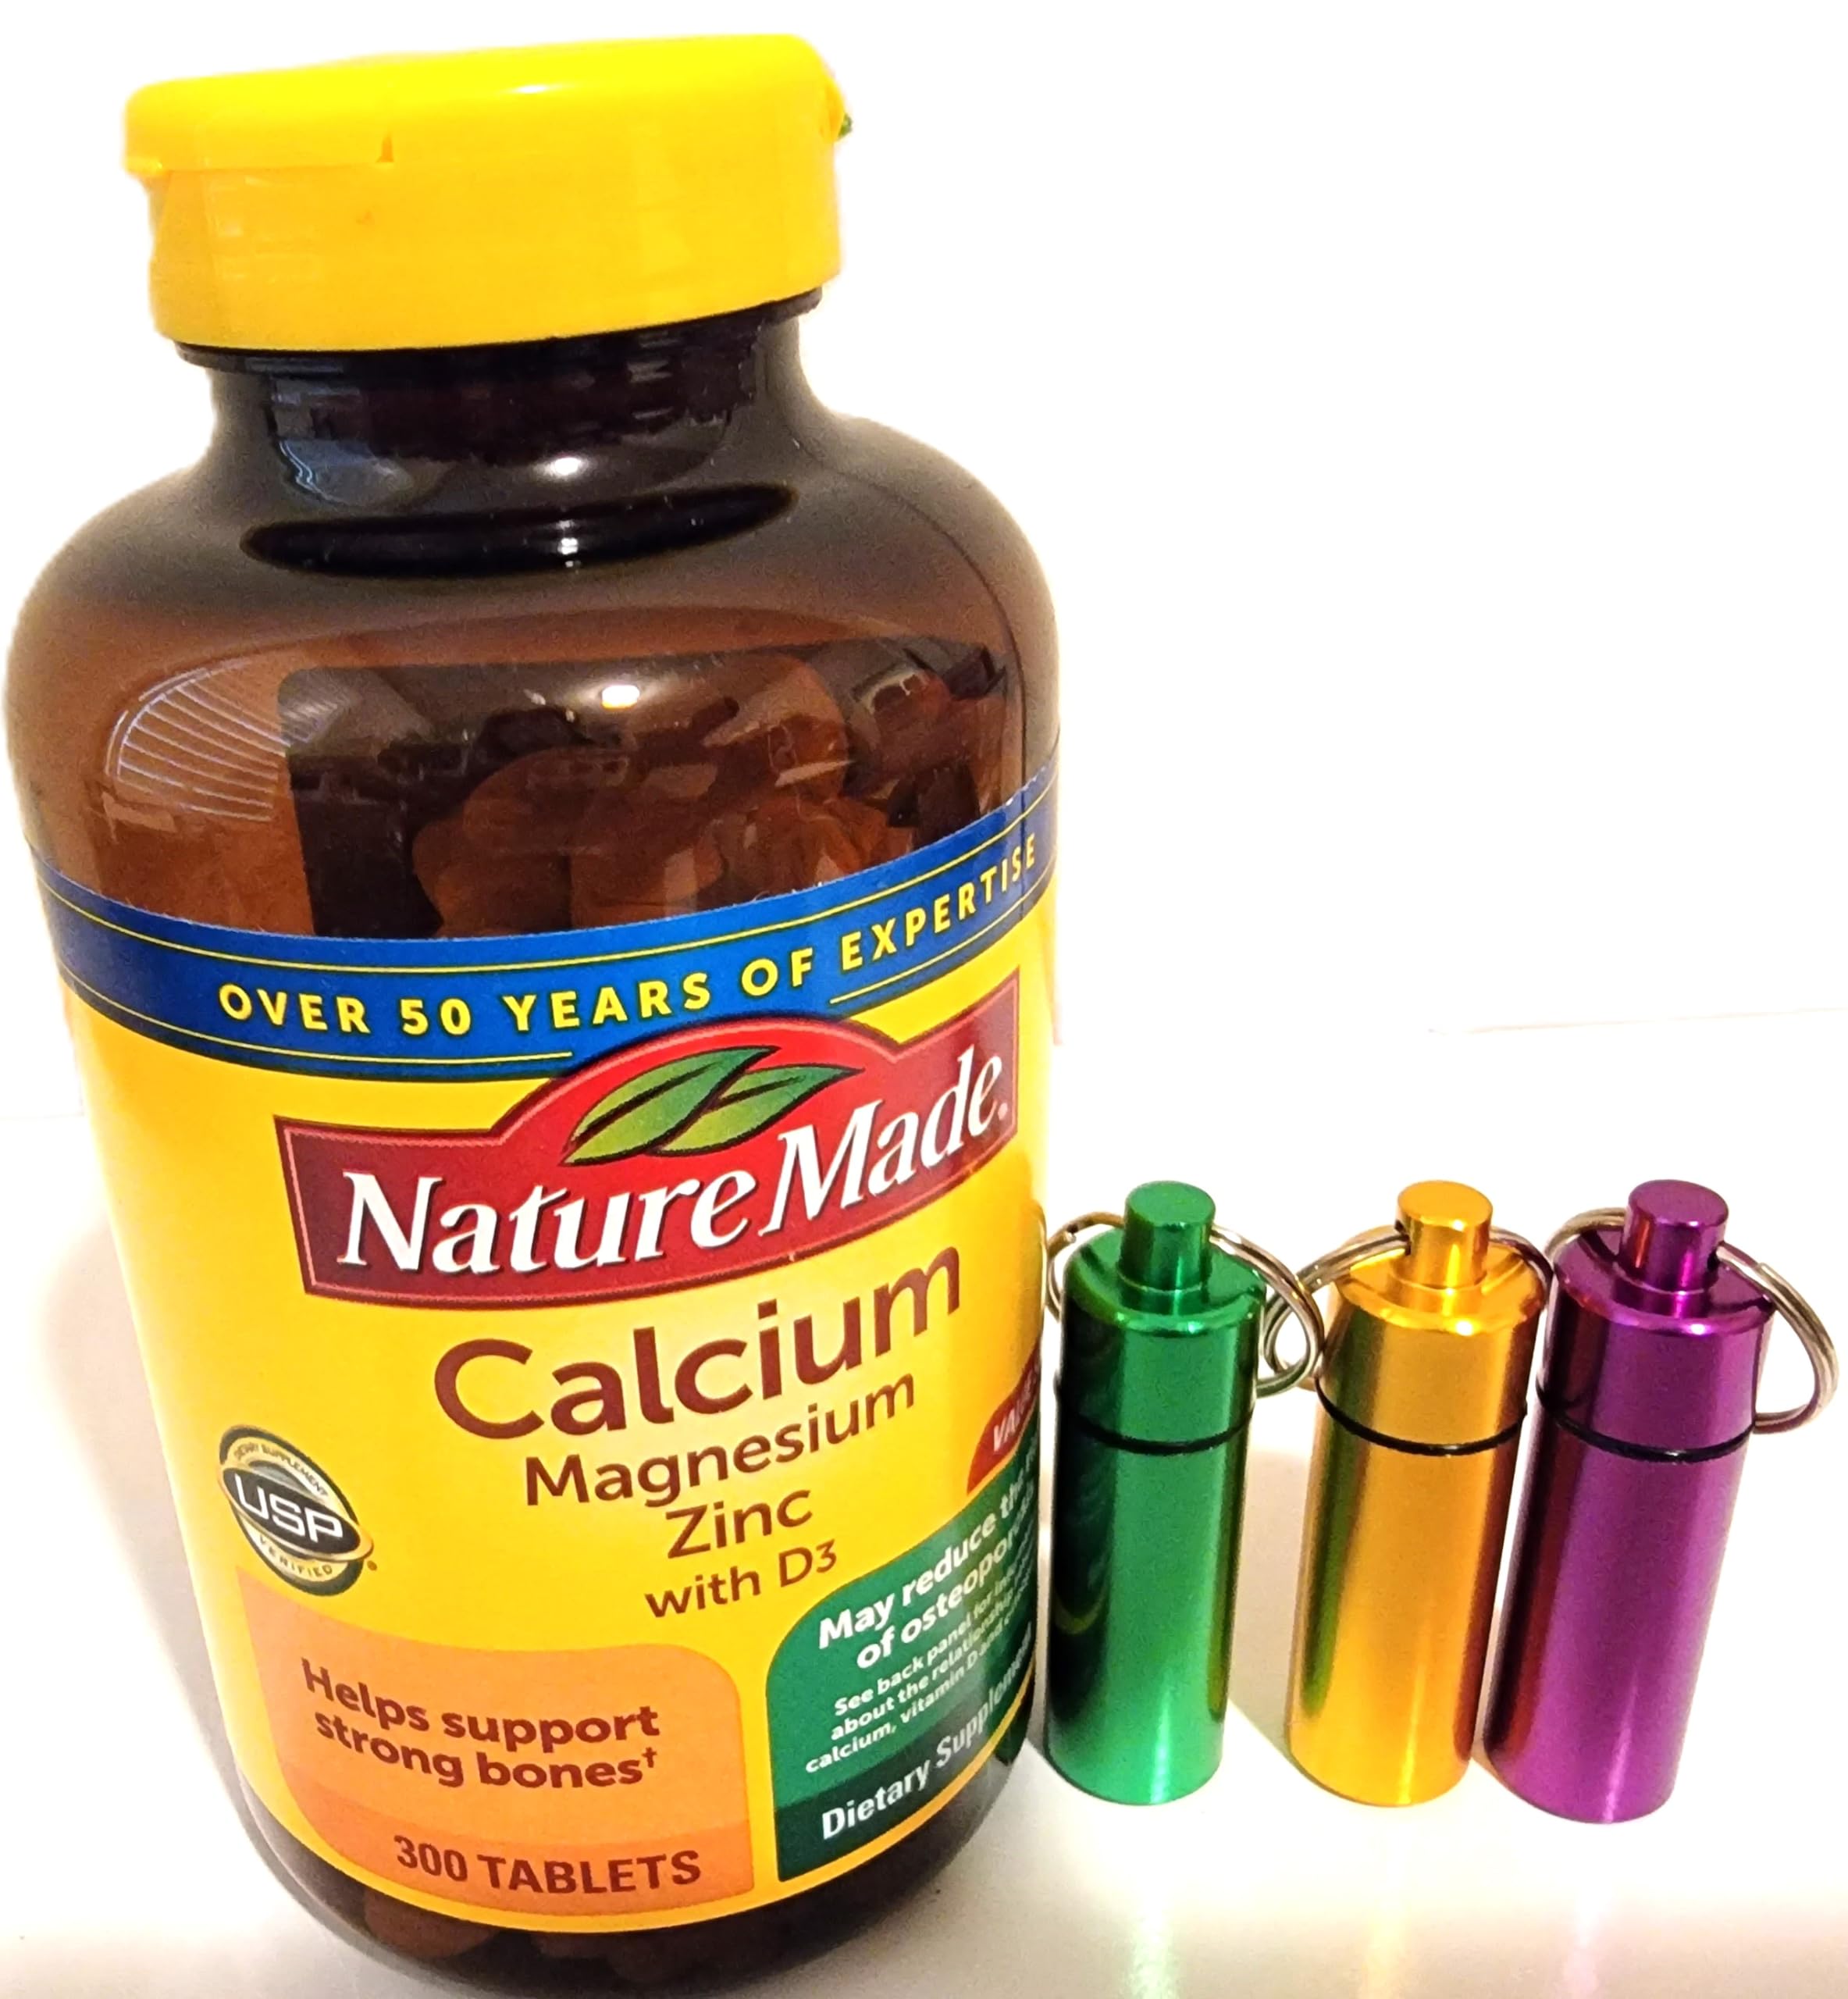 Nature Made Calcium Magnesium Zinc with Vitamin D3 300 Tablets with One Keychain Pill Holder (Assorted Colors)